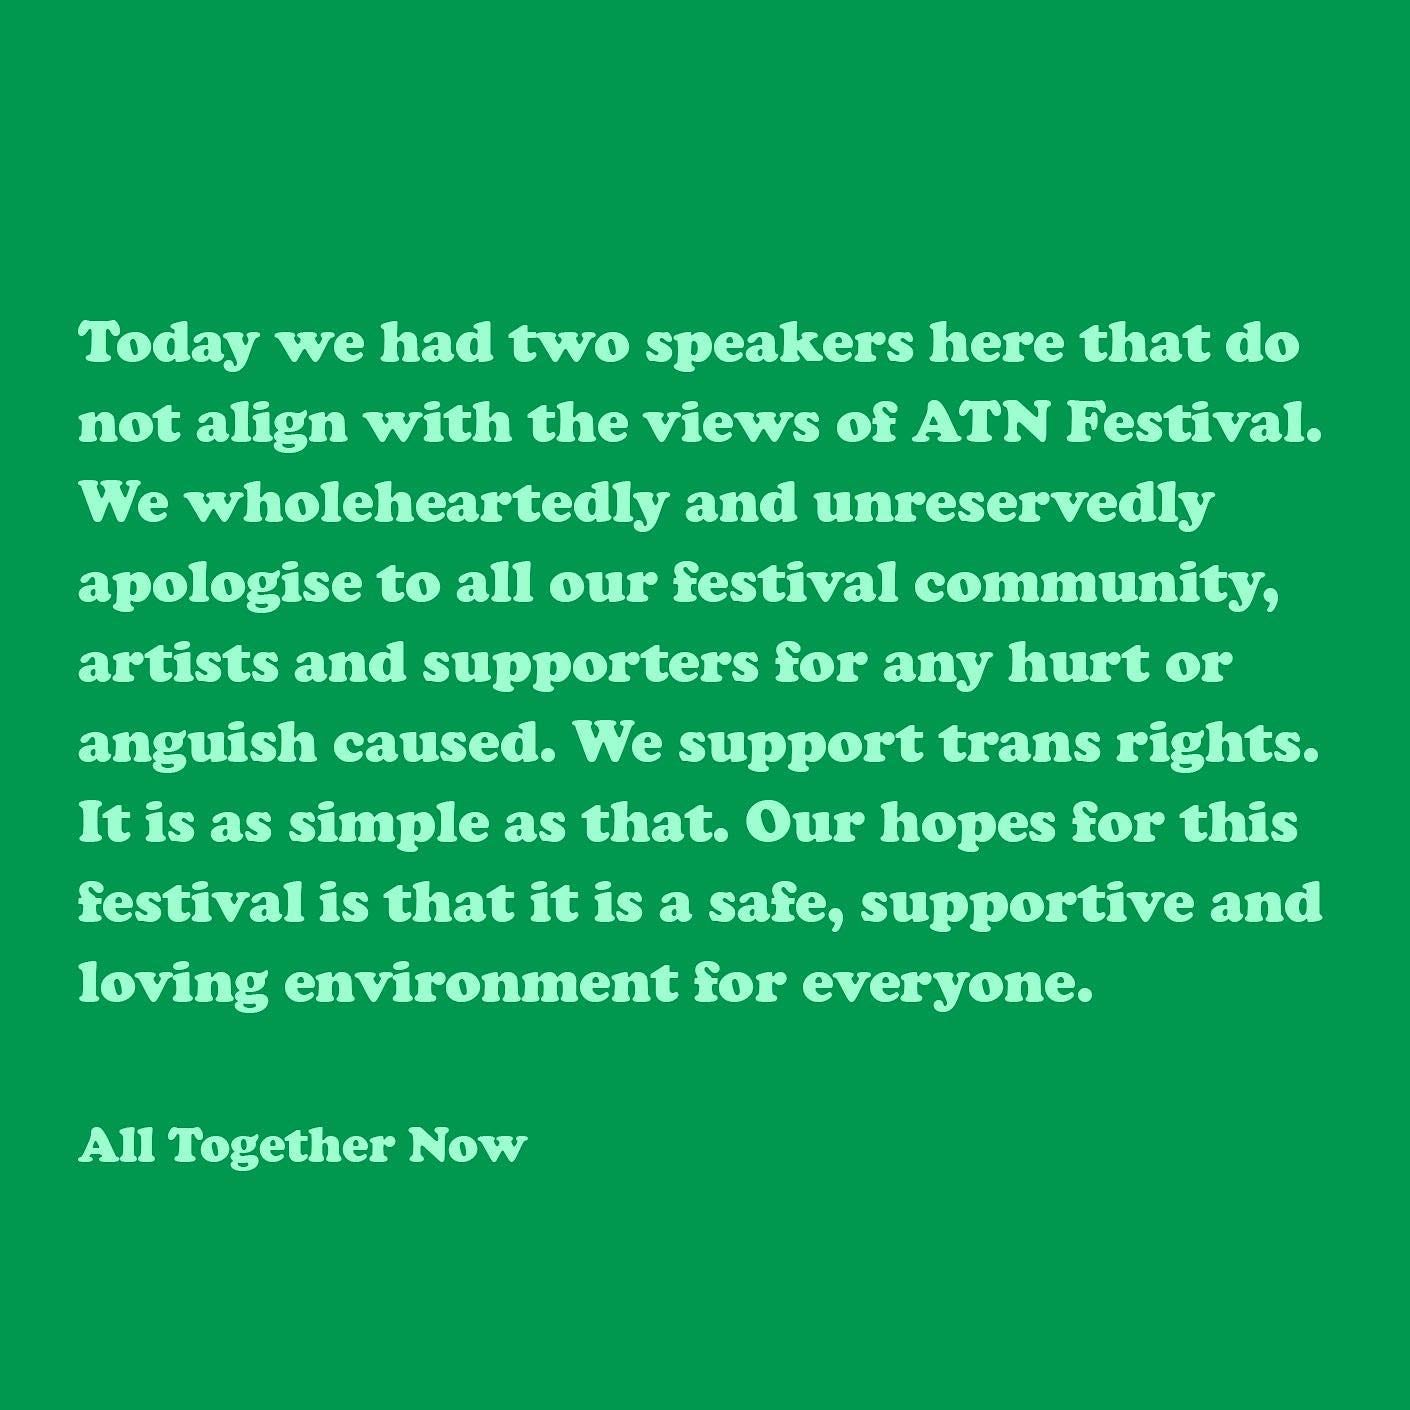 Today we had two speakers here that do not align with the views of ATN Festival. We wholeheartedly and unreservedly apologise to all our festival community, artists and supporters for any hurt or anguish caused. We support trans rights. It is as simple as that. Our hopes for this festival is [sic] that it is a safe, supportive and loving environment for everyone.  All Together Now